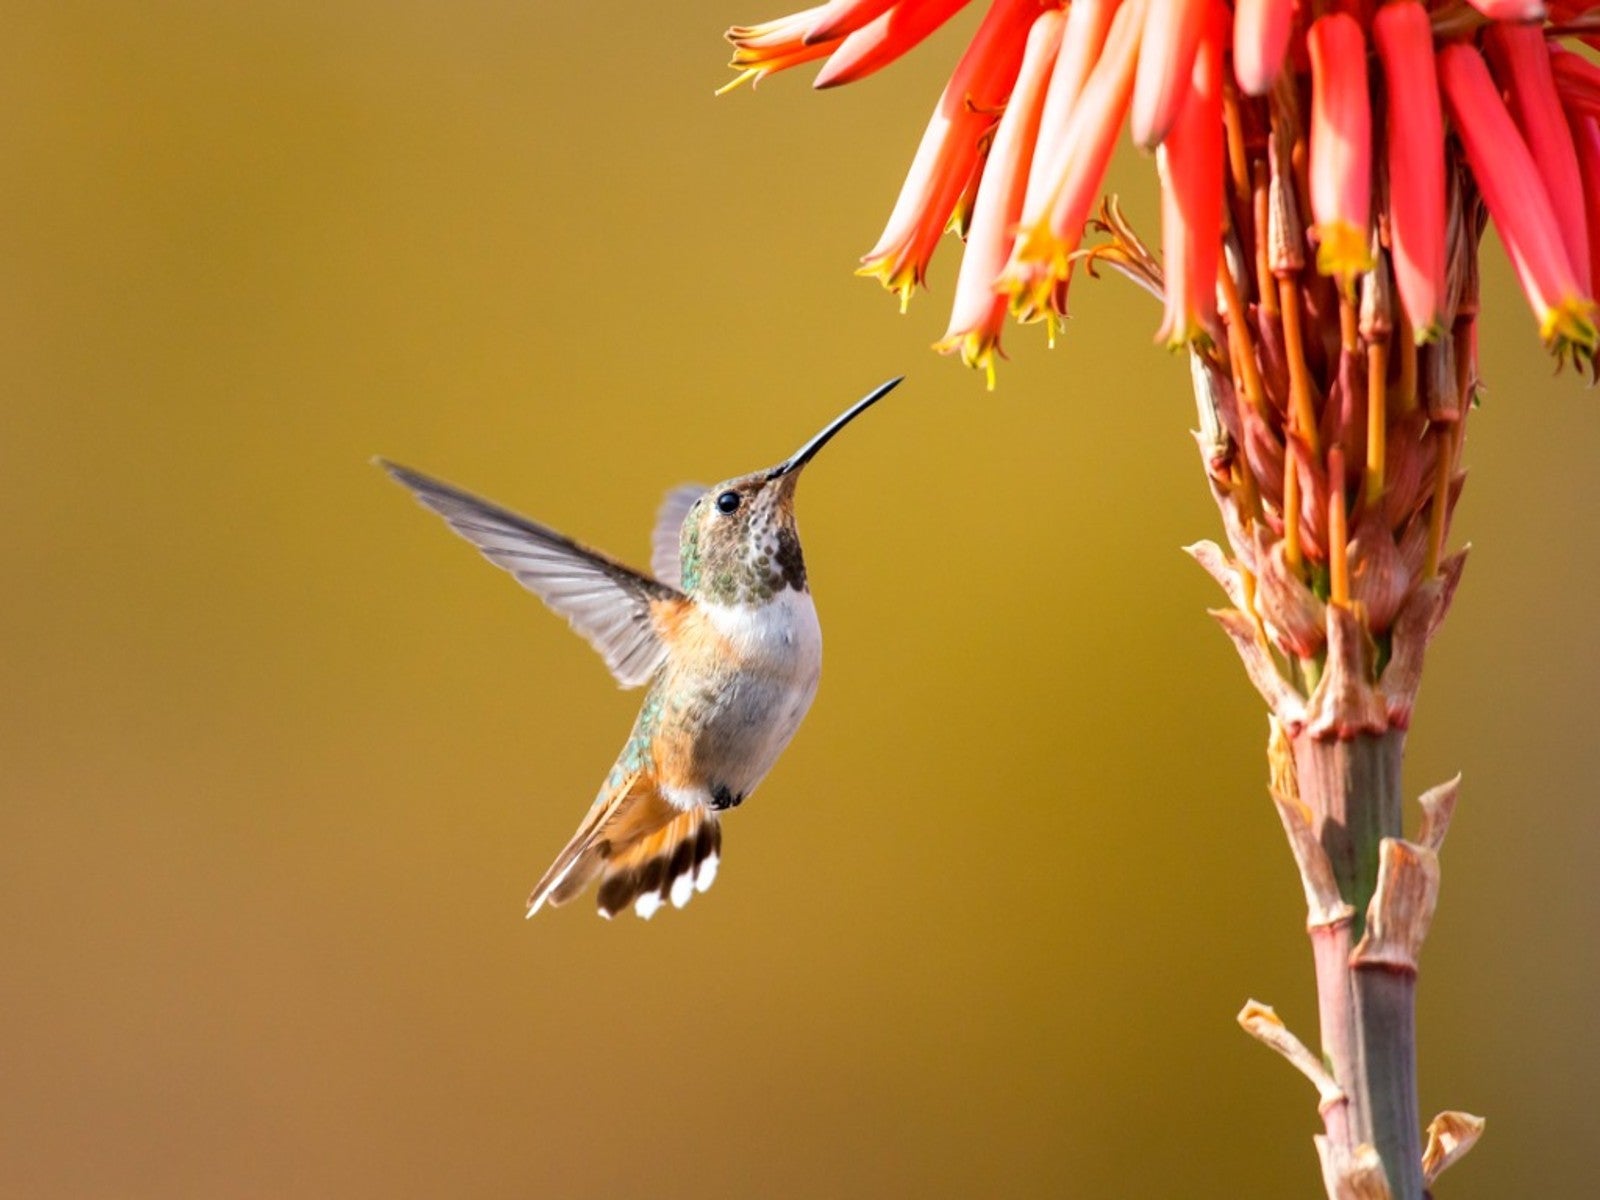 A hummingbird hovers under a bright red flower against a muted yellow background